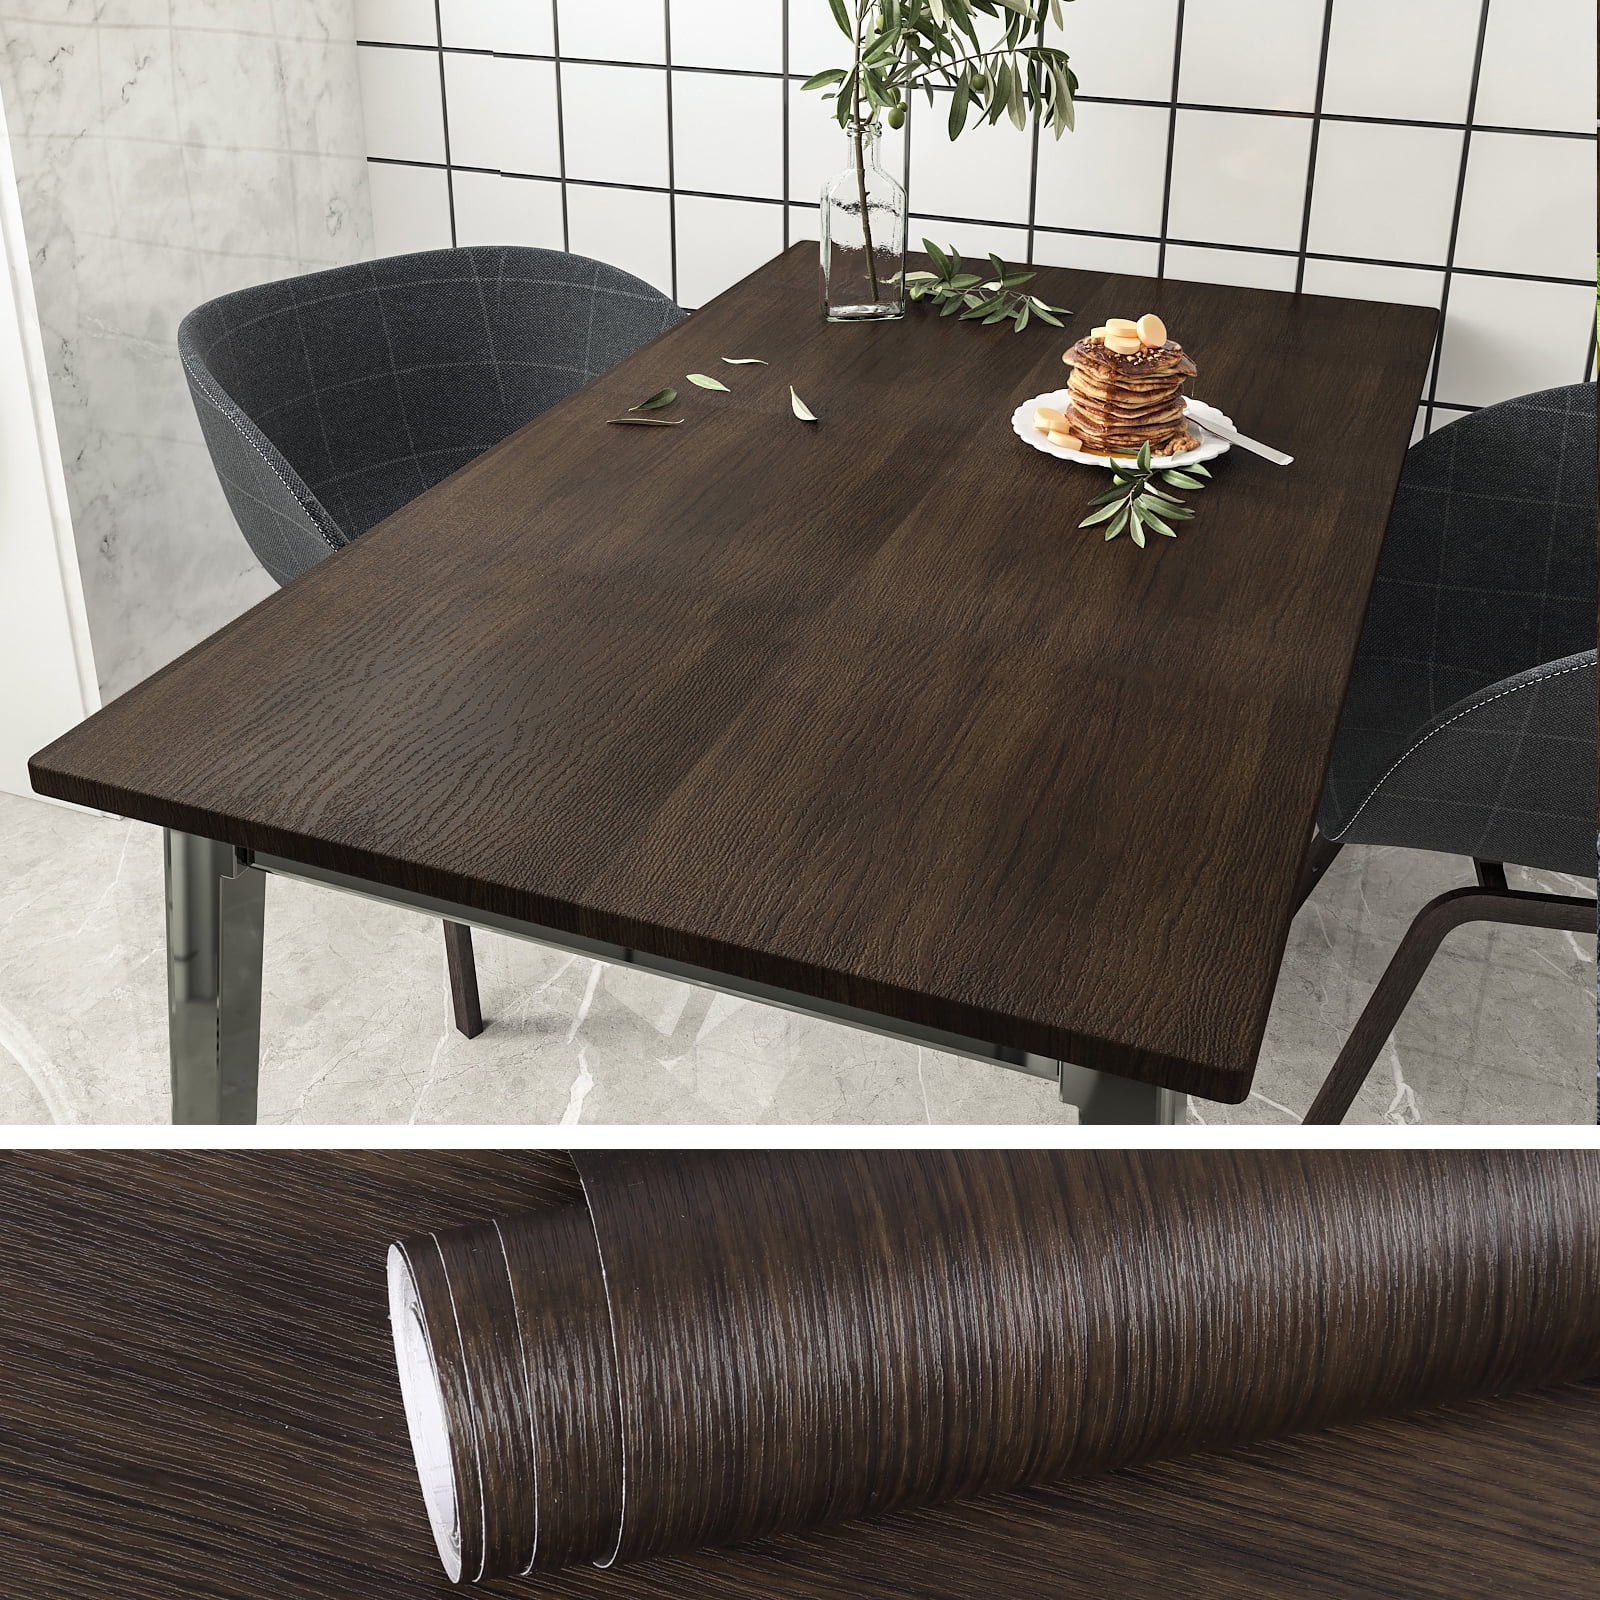 Brown Wood Wallpaper Update Furniture Stickers Wall Covering Self Adhesive Stick on Wallpaper Wood Brown Vinyl Wrap Paper Peel and Stick Removable Old Table Desk Cabinet Countertop 45cm×300cm 